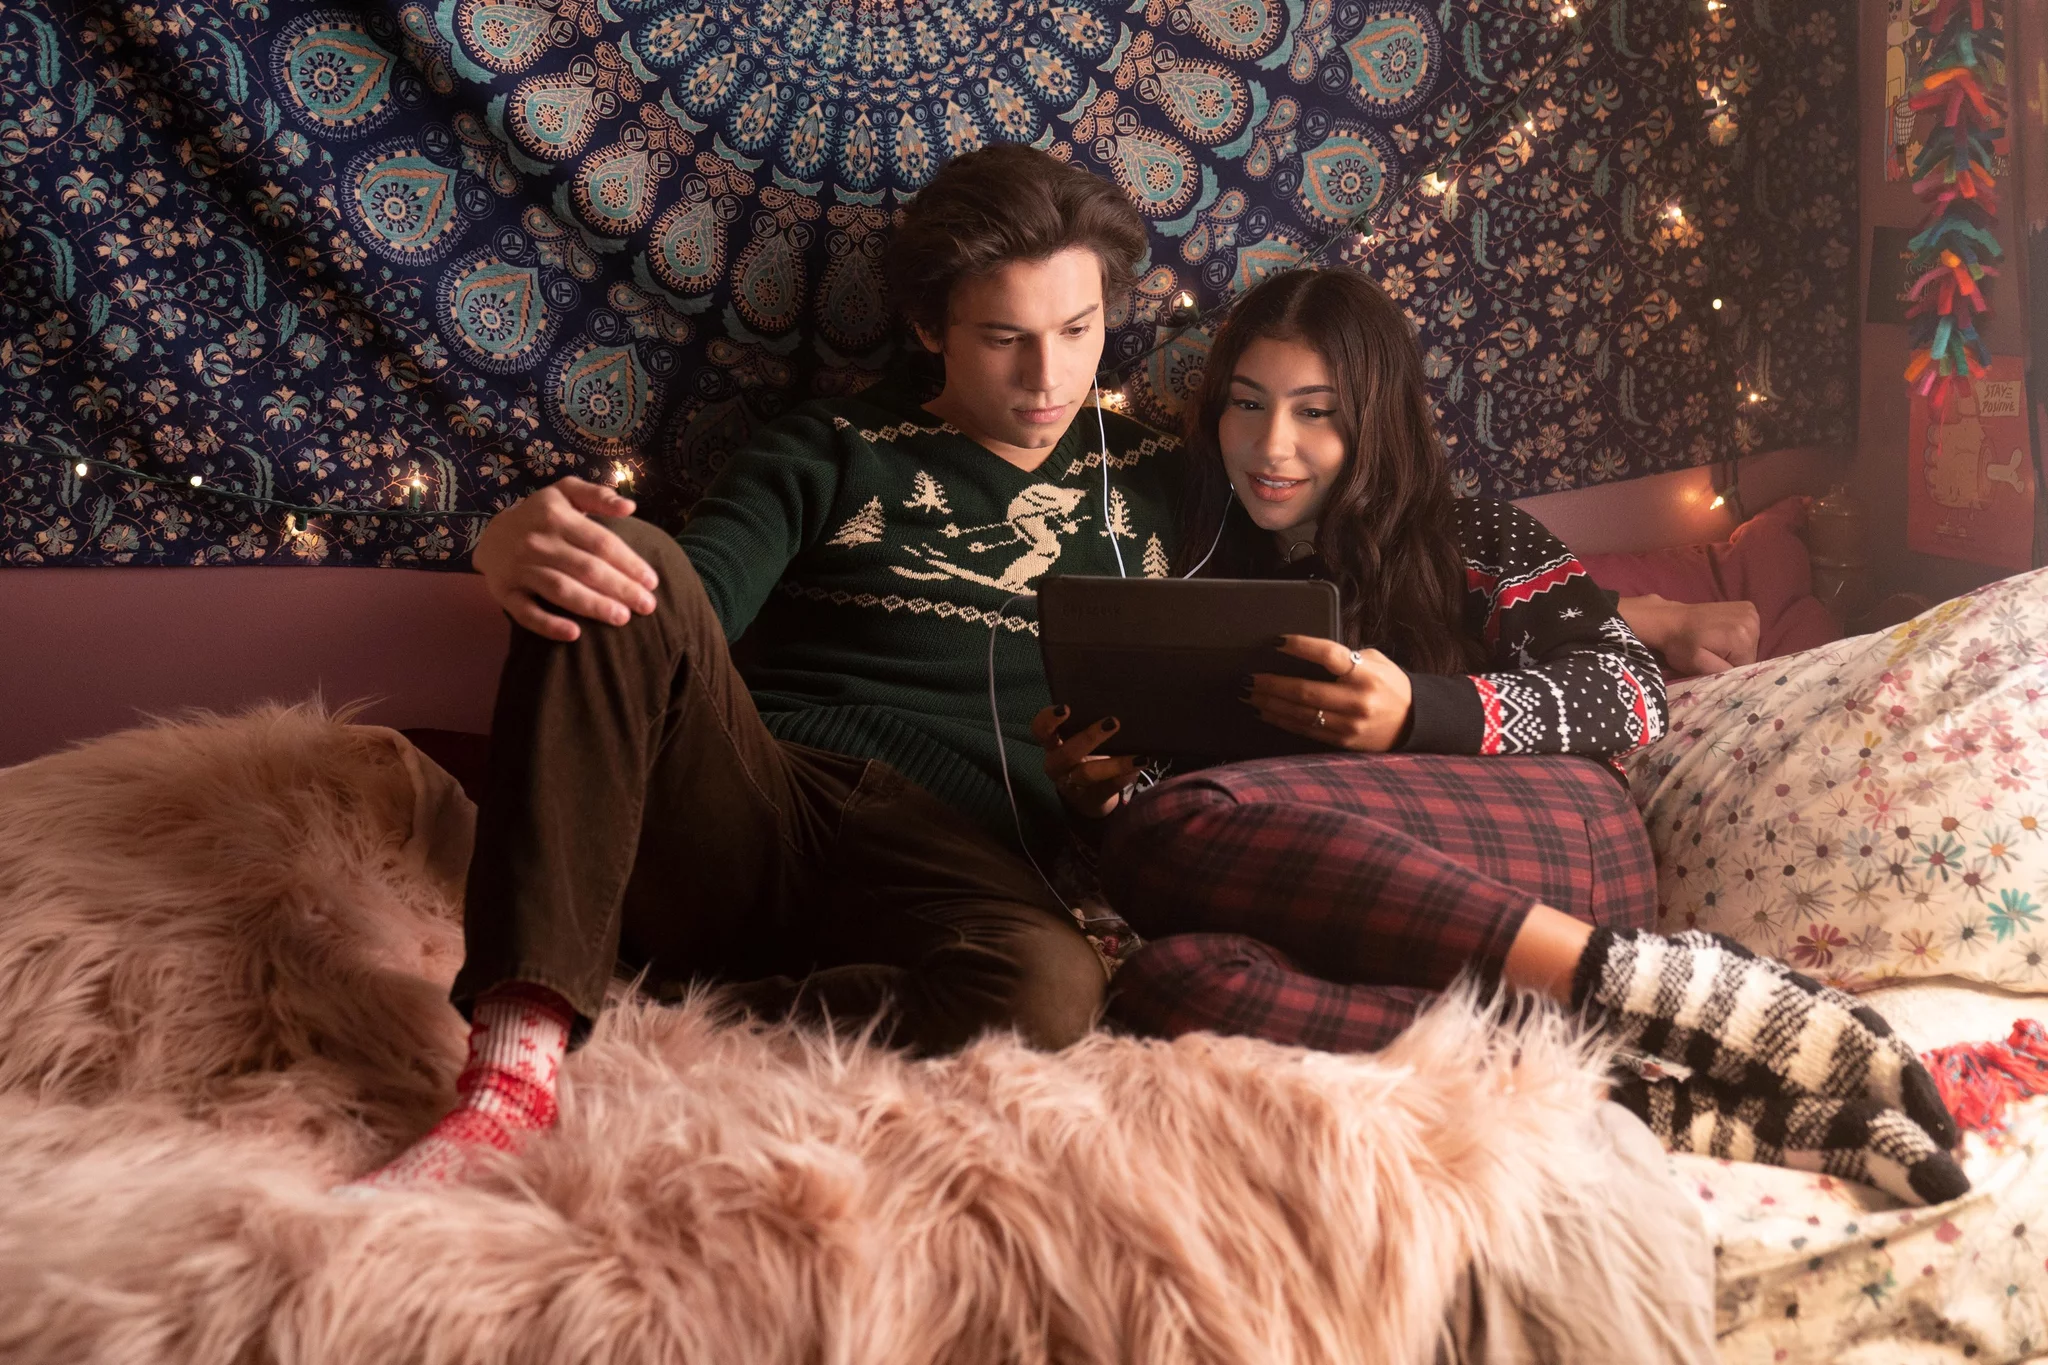 A still from Love, Victor of Felix and Pilar on her bed watching a movie on an iPad together